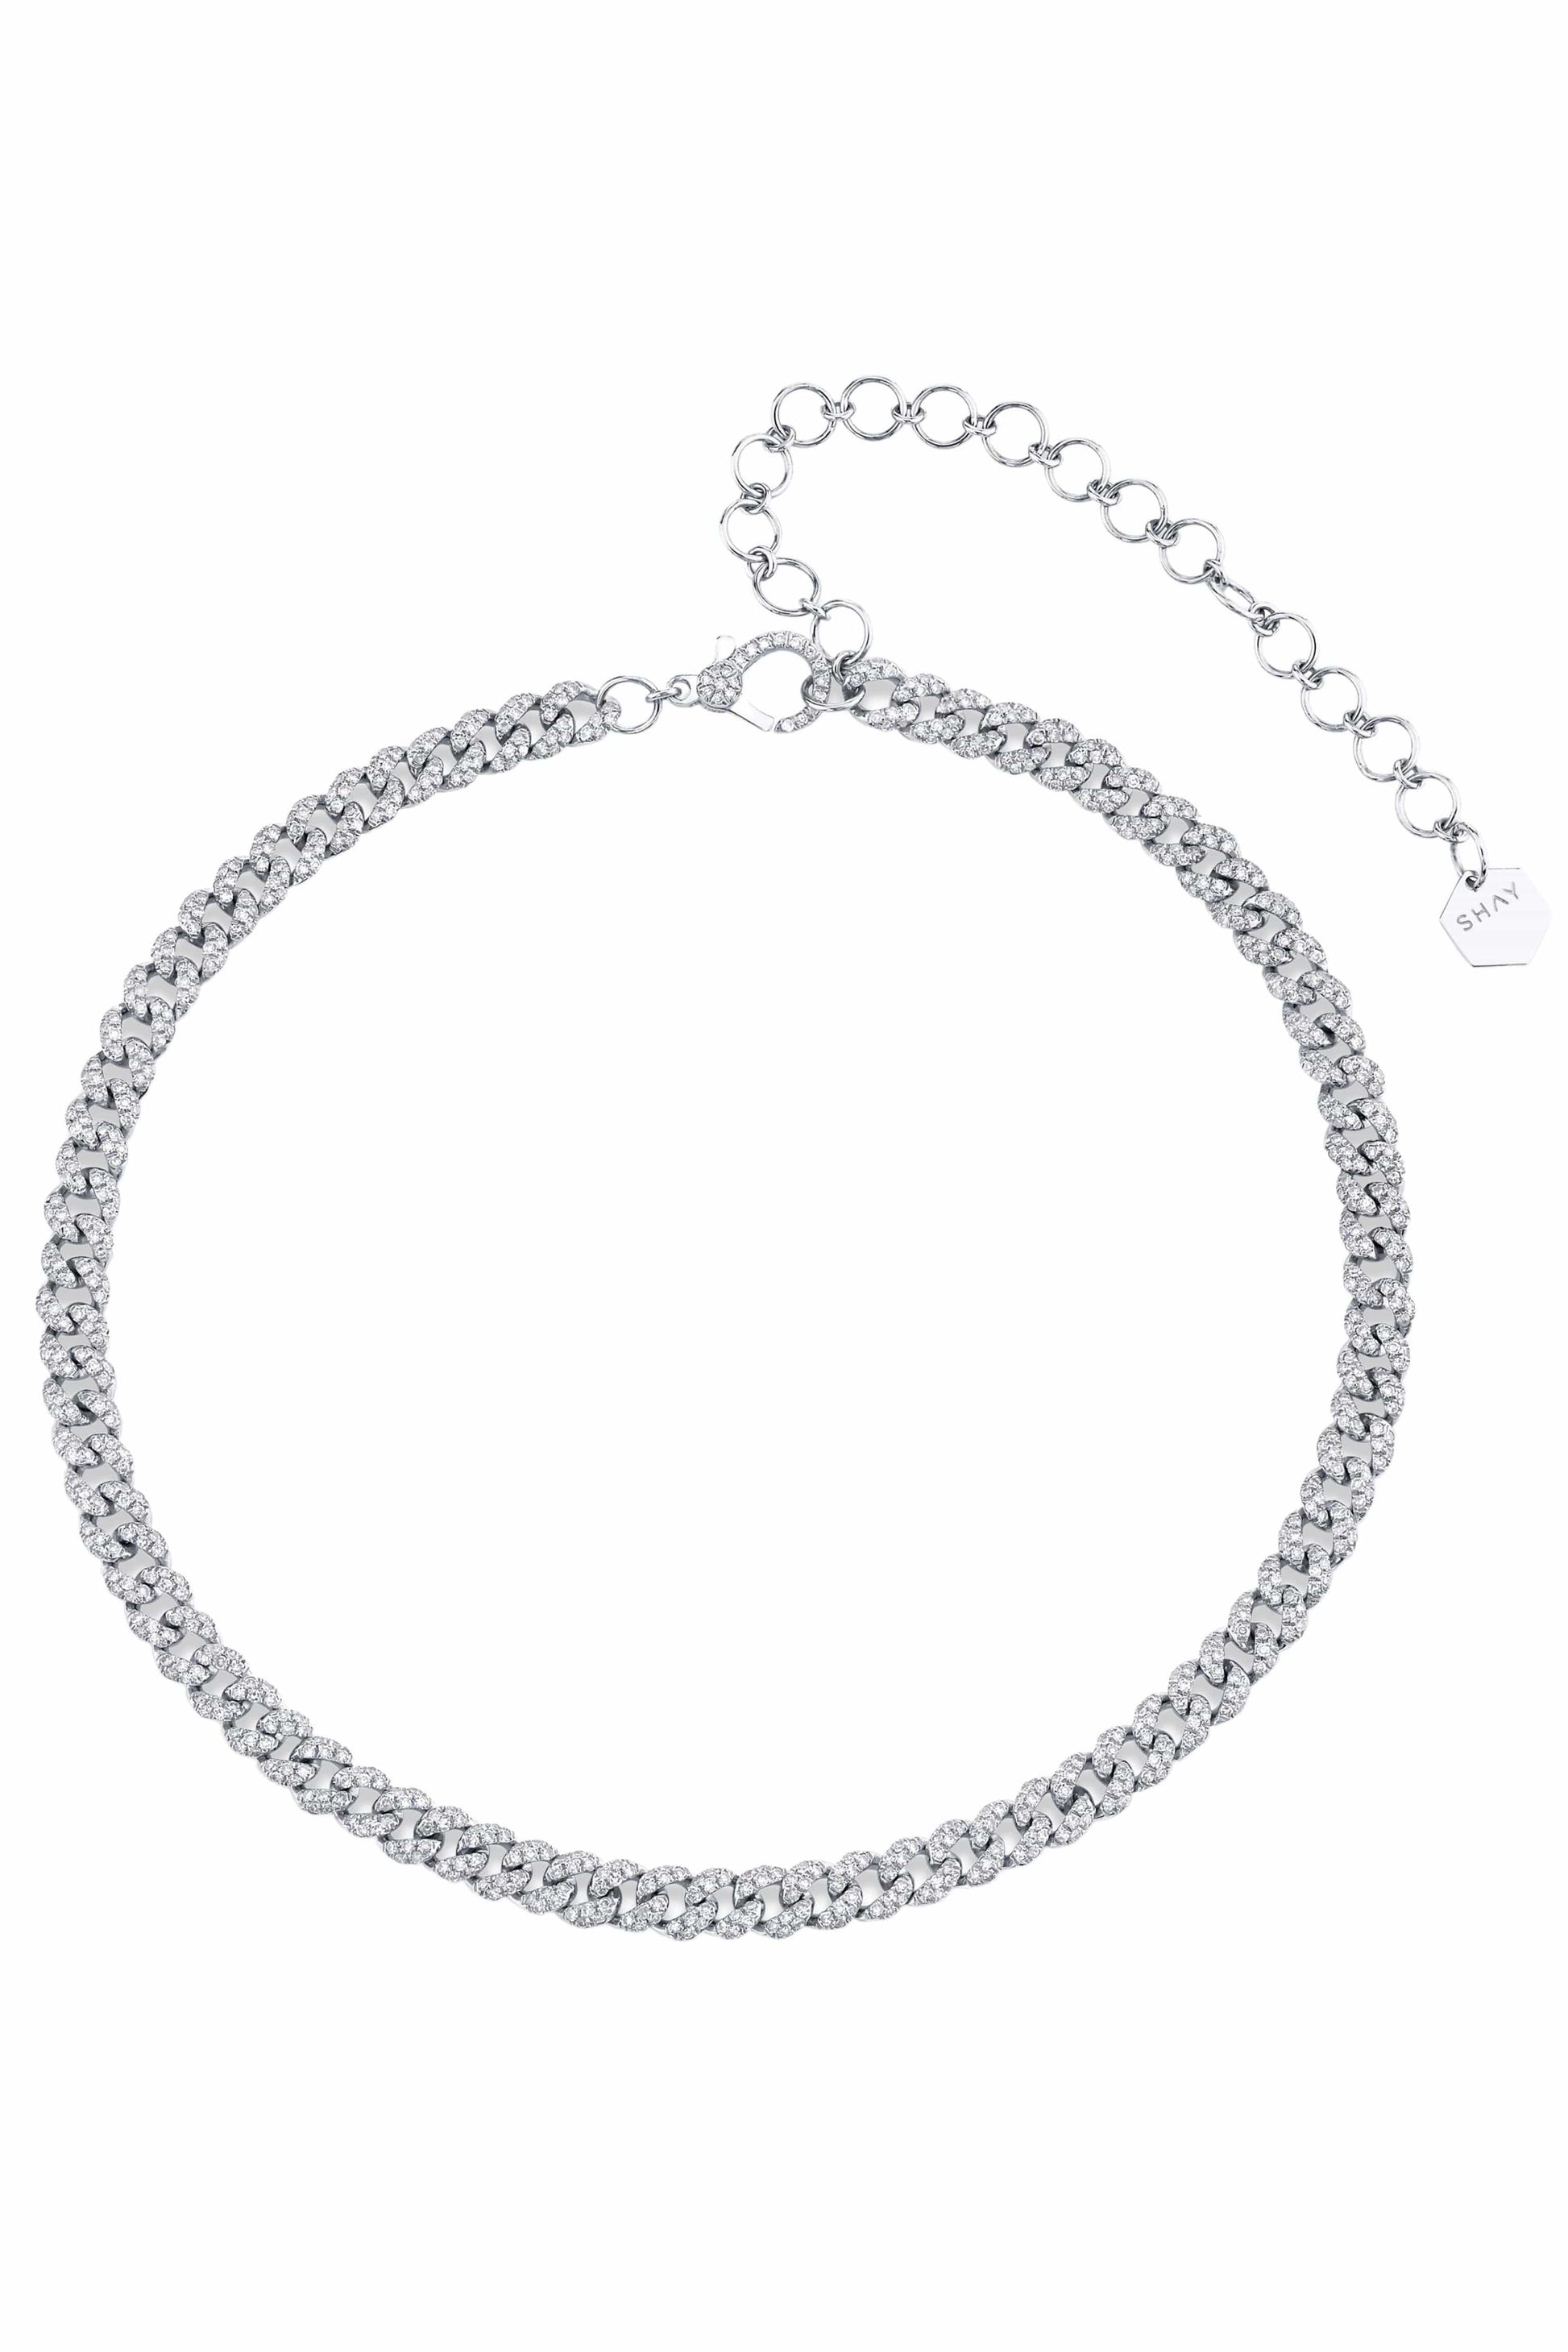 SHAY JEWELRY-Diamond Pave Mini Link Necklace-WHITE GOLD